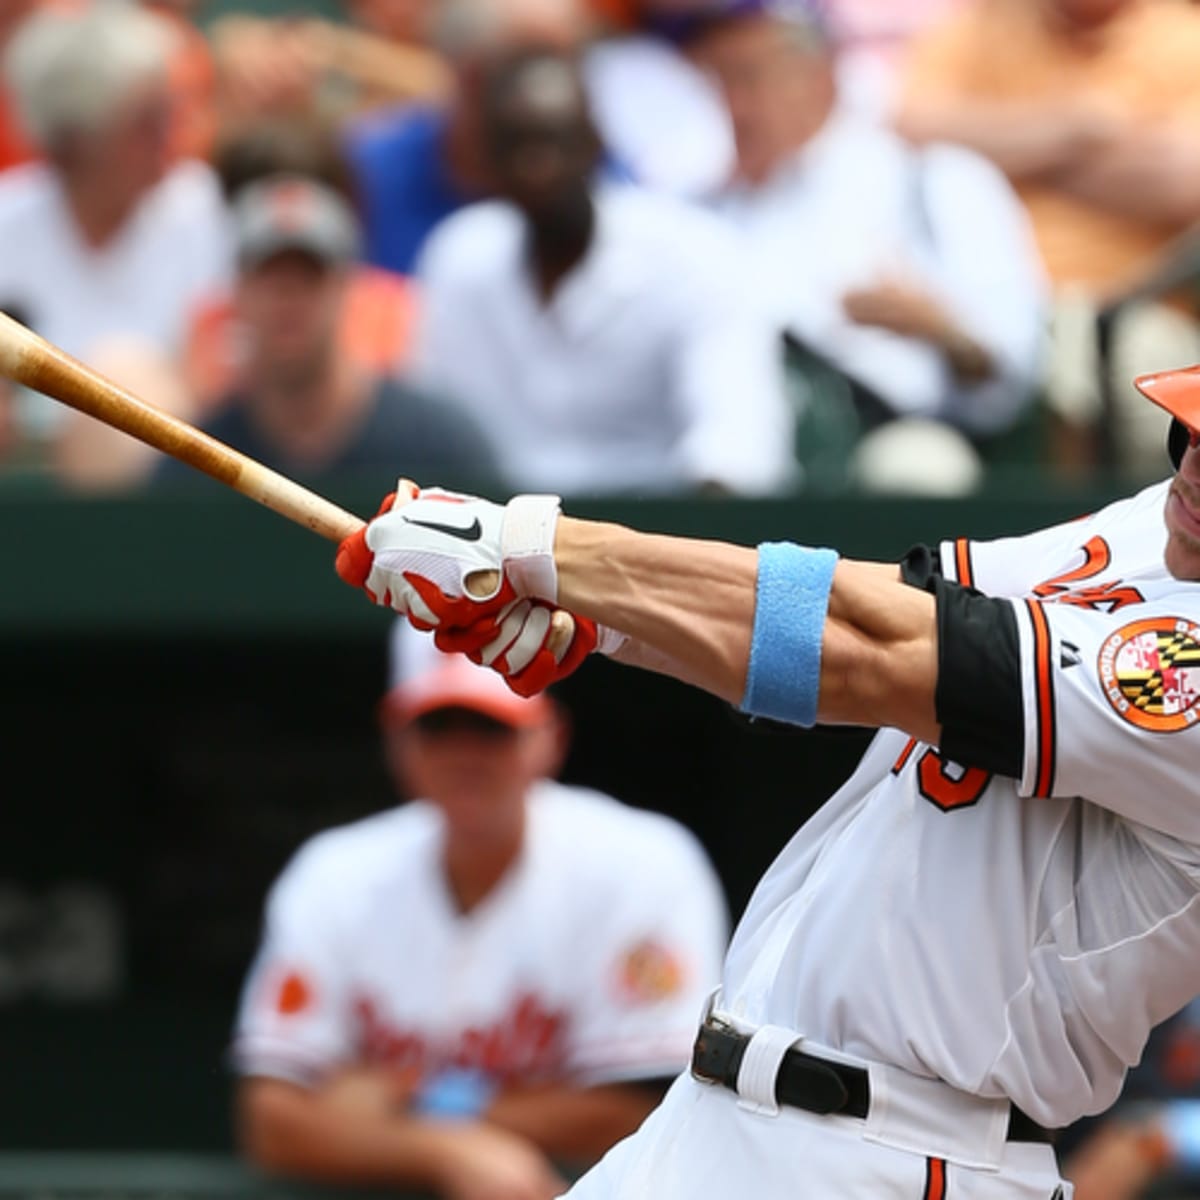 With Steve Pearce signing with Rays, the last of the Orioles free